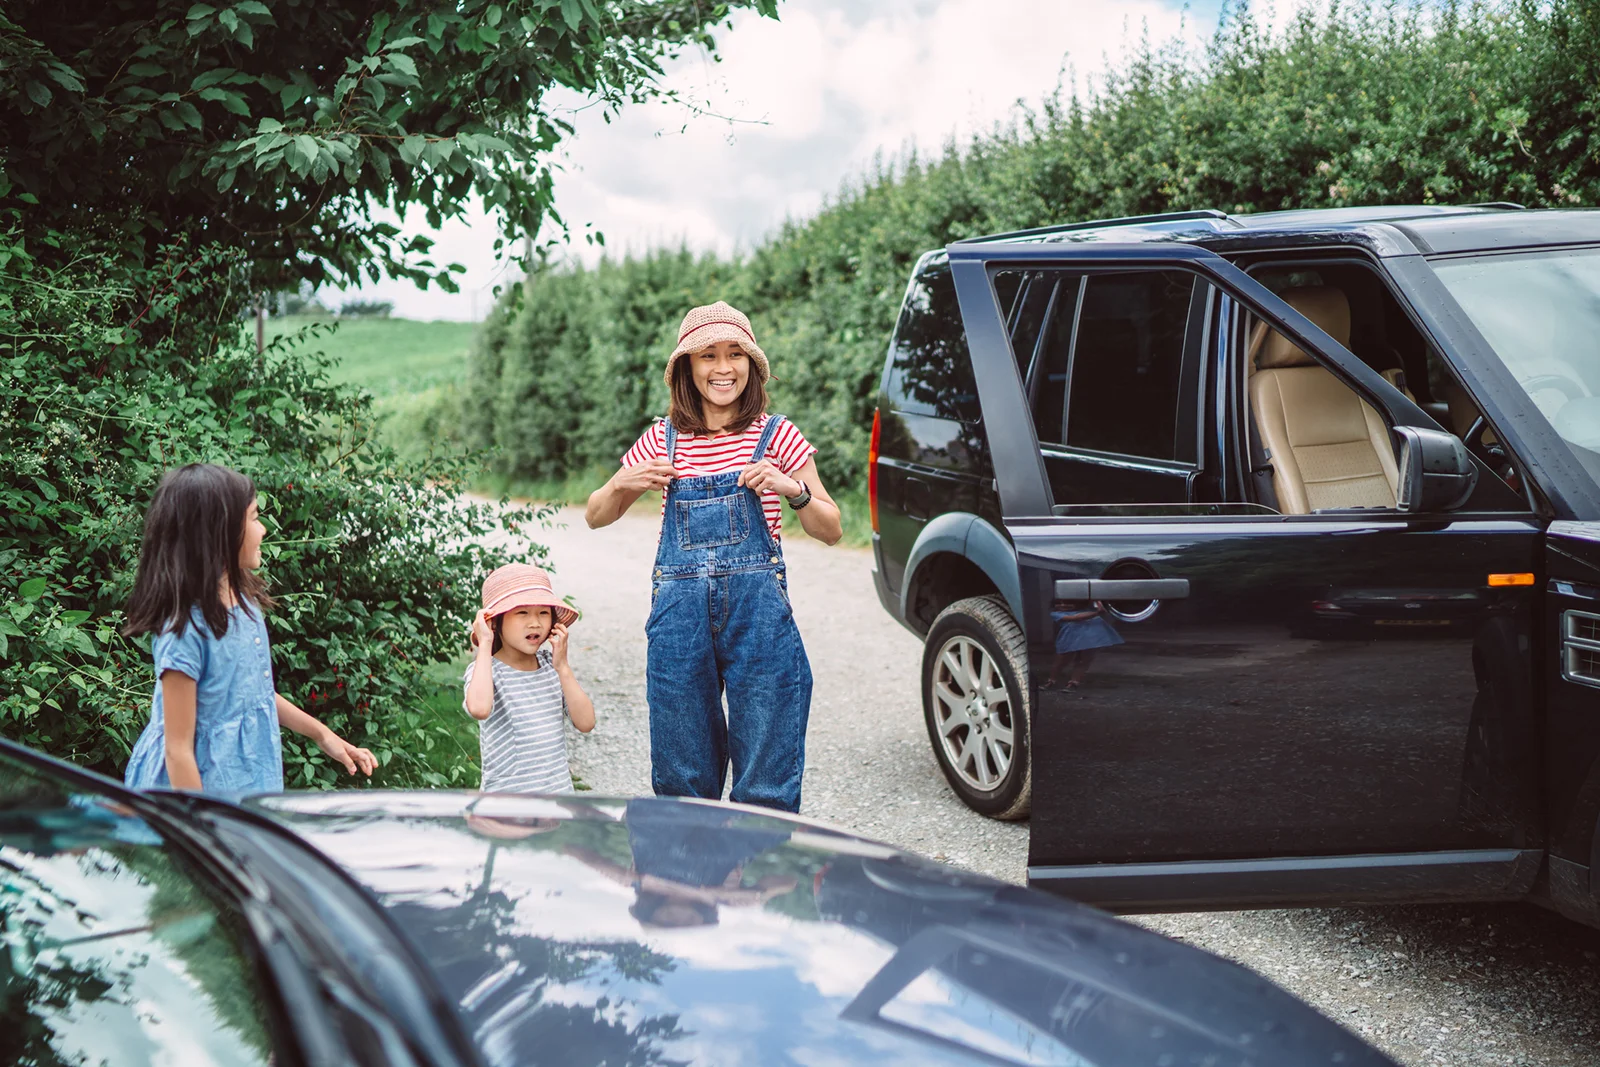 Here are six useful hints for making it through a long car trip with a large family.